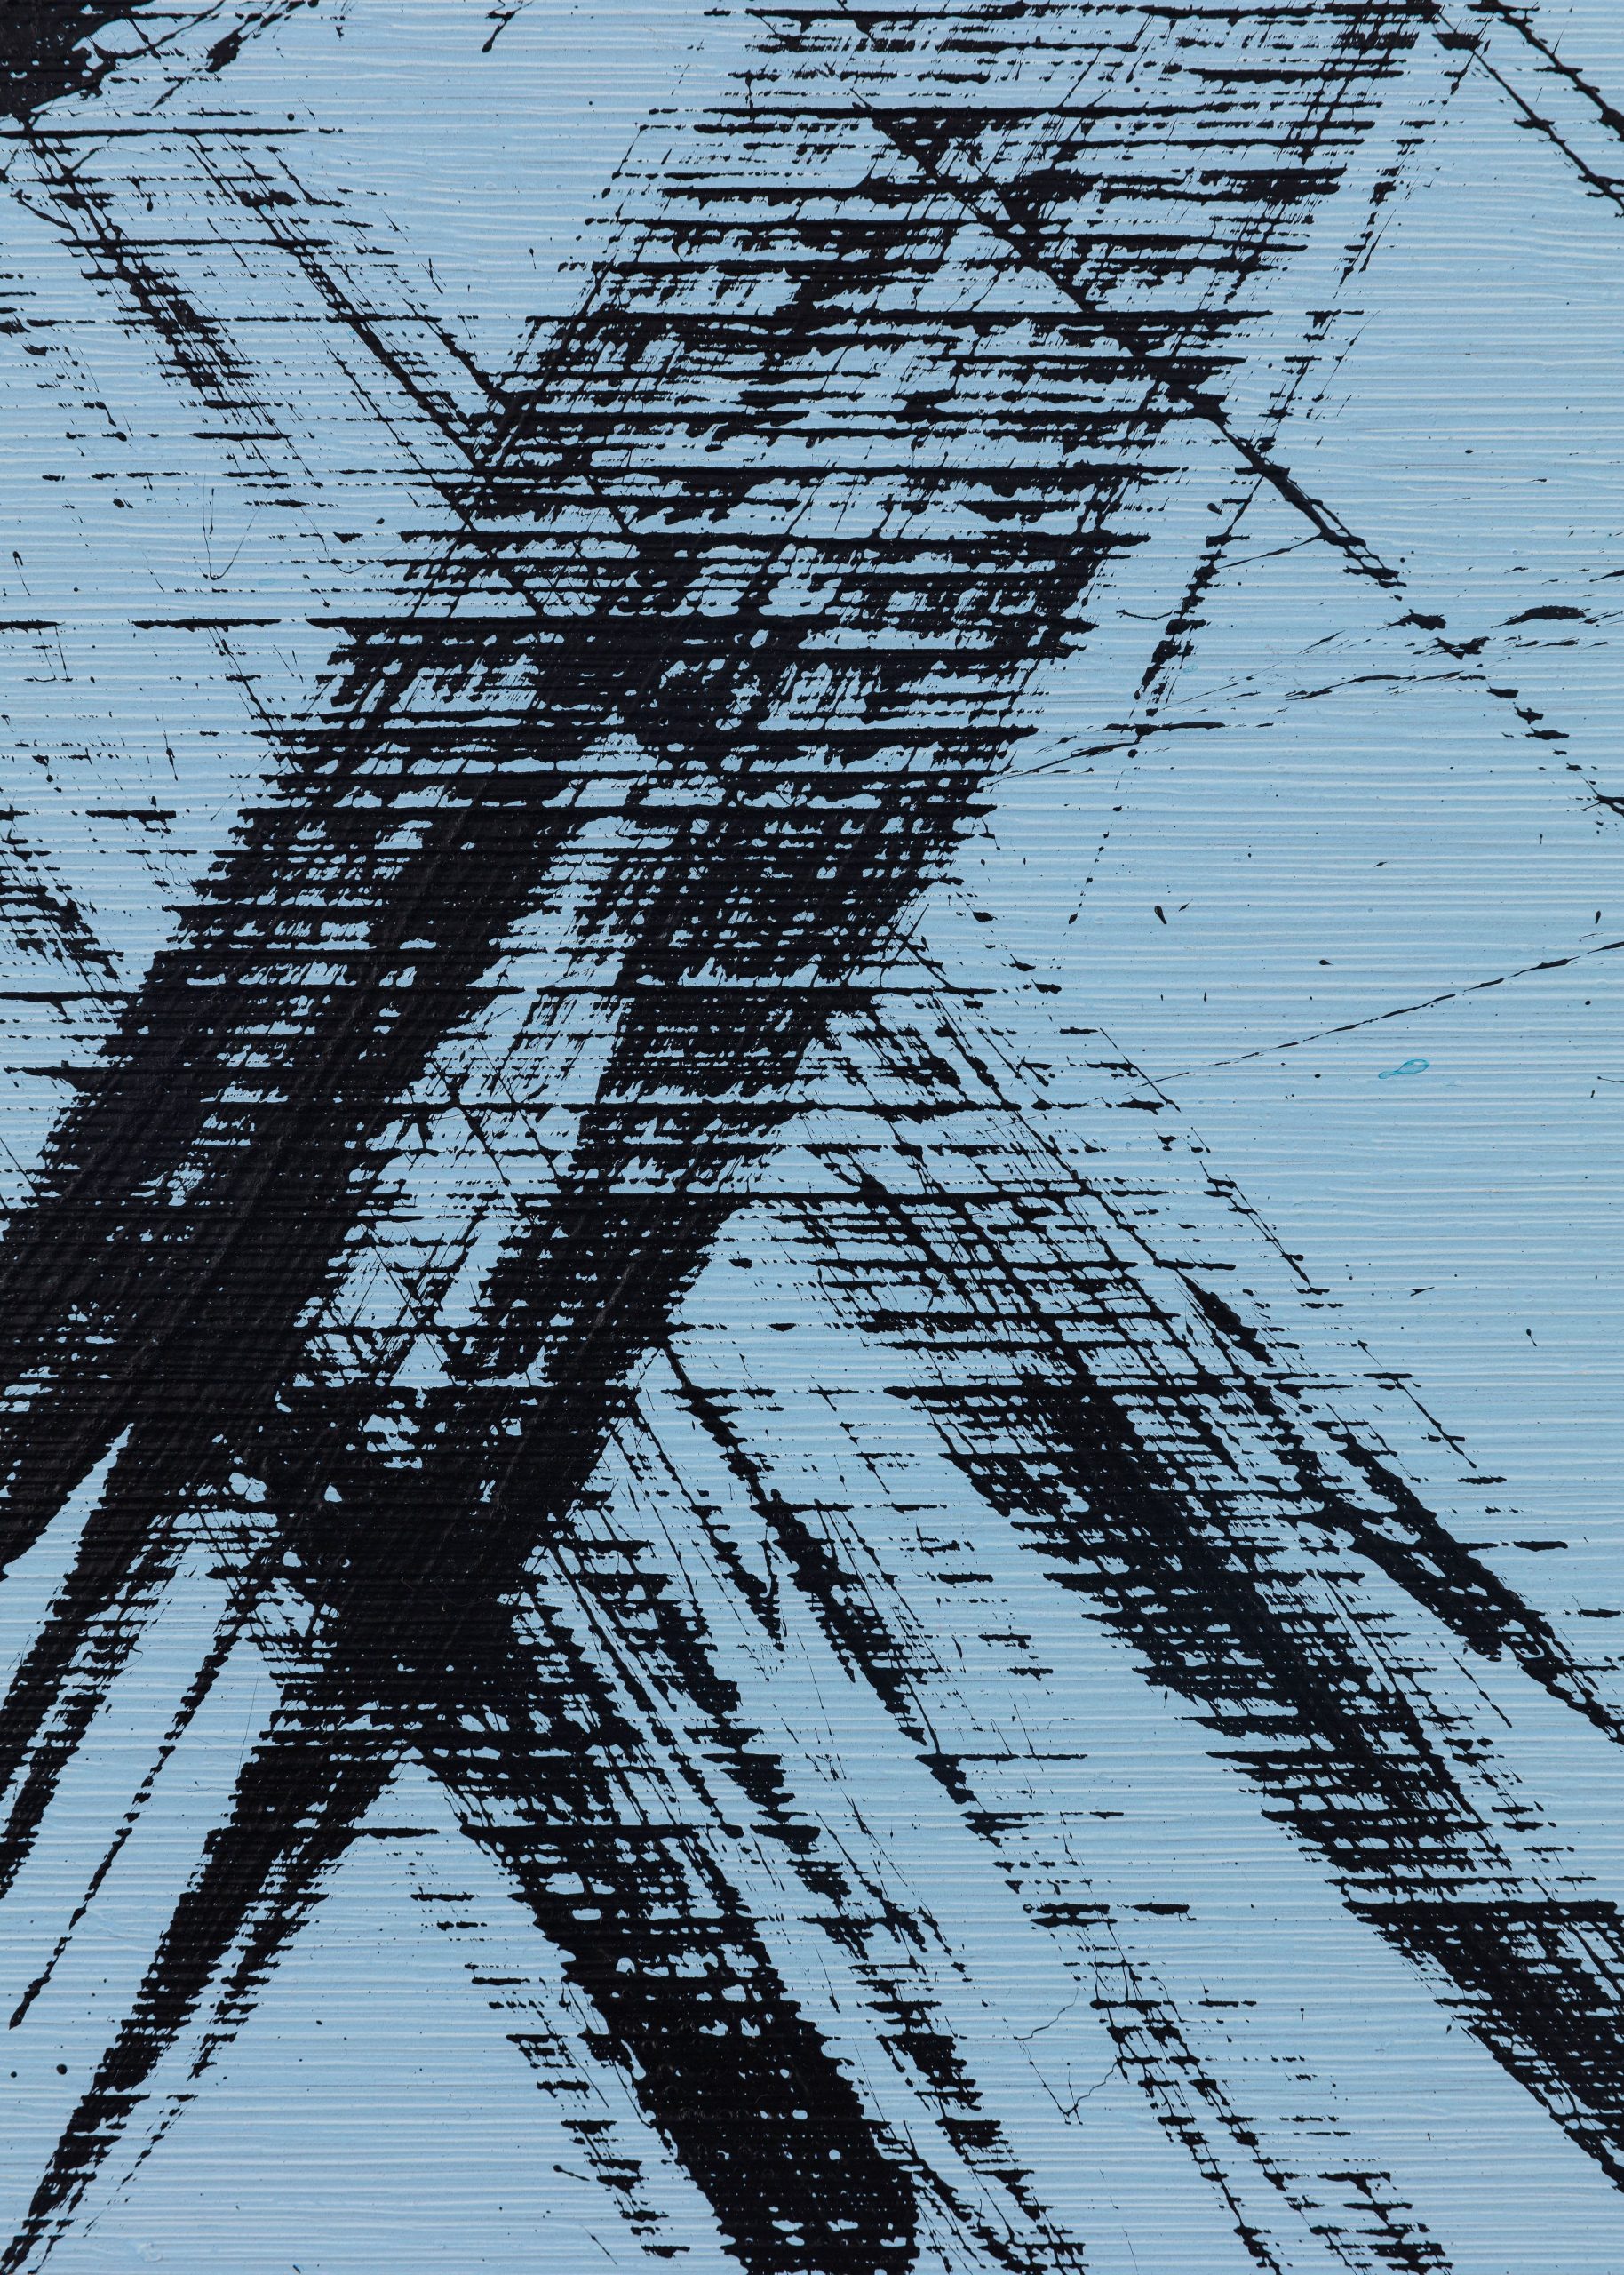 Hans Hartung T 1982 - R 17, 1982, Acrylic on canvas, Edition Unique, 60.0 x 81.0 (cm) - 23.6 x 31.9 (in), detail, USD 100,001 – 200,000, @ Perrotin